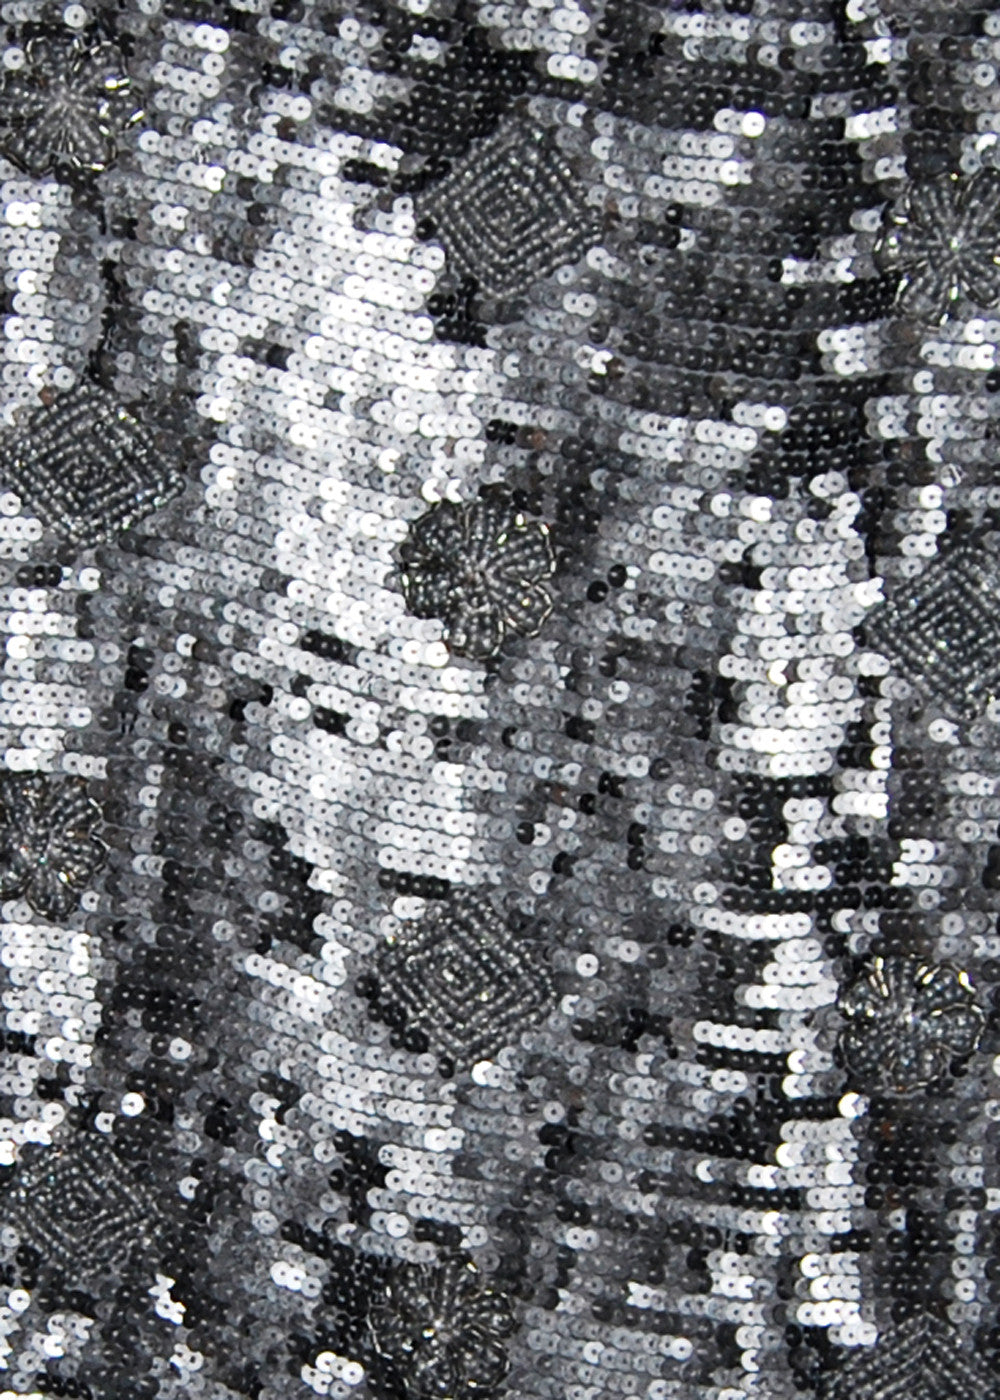 Silver Sequined Fabric (Sold as a 2.5 yard piece)